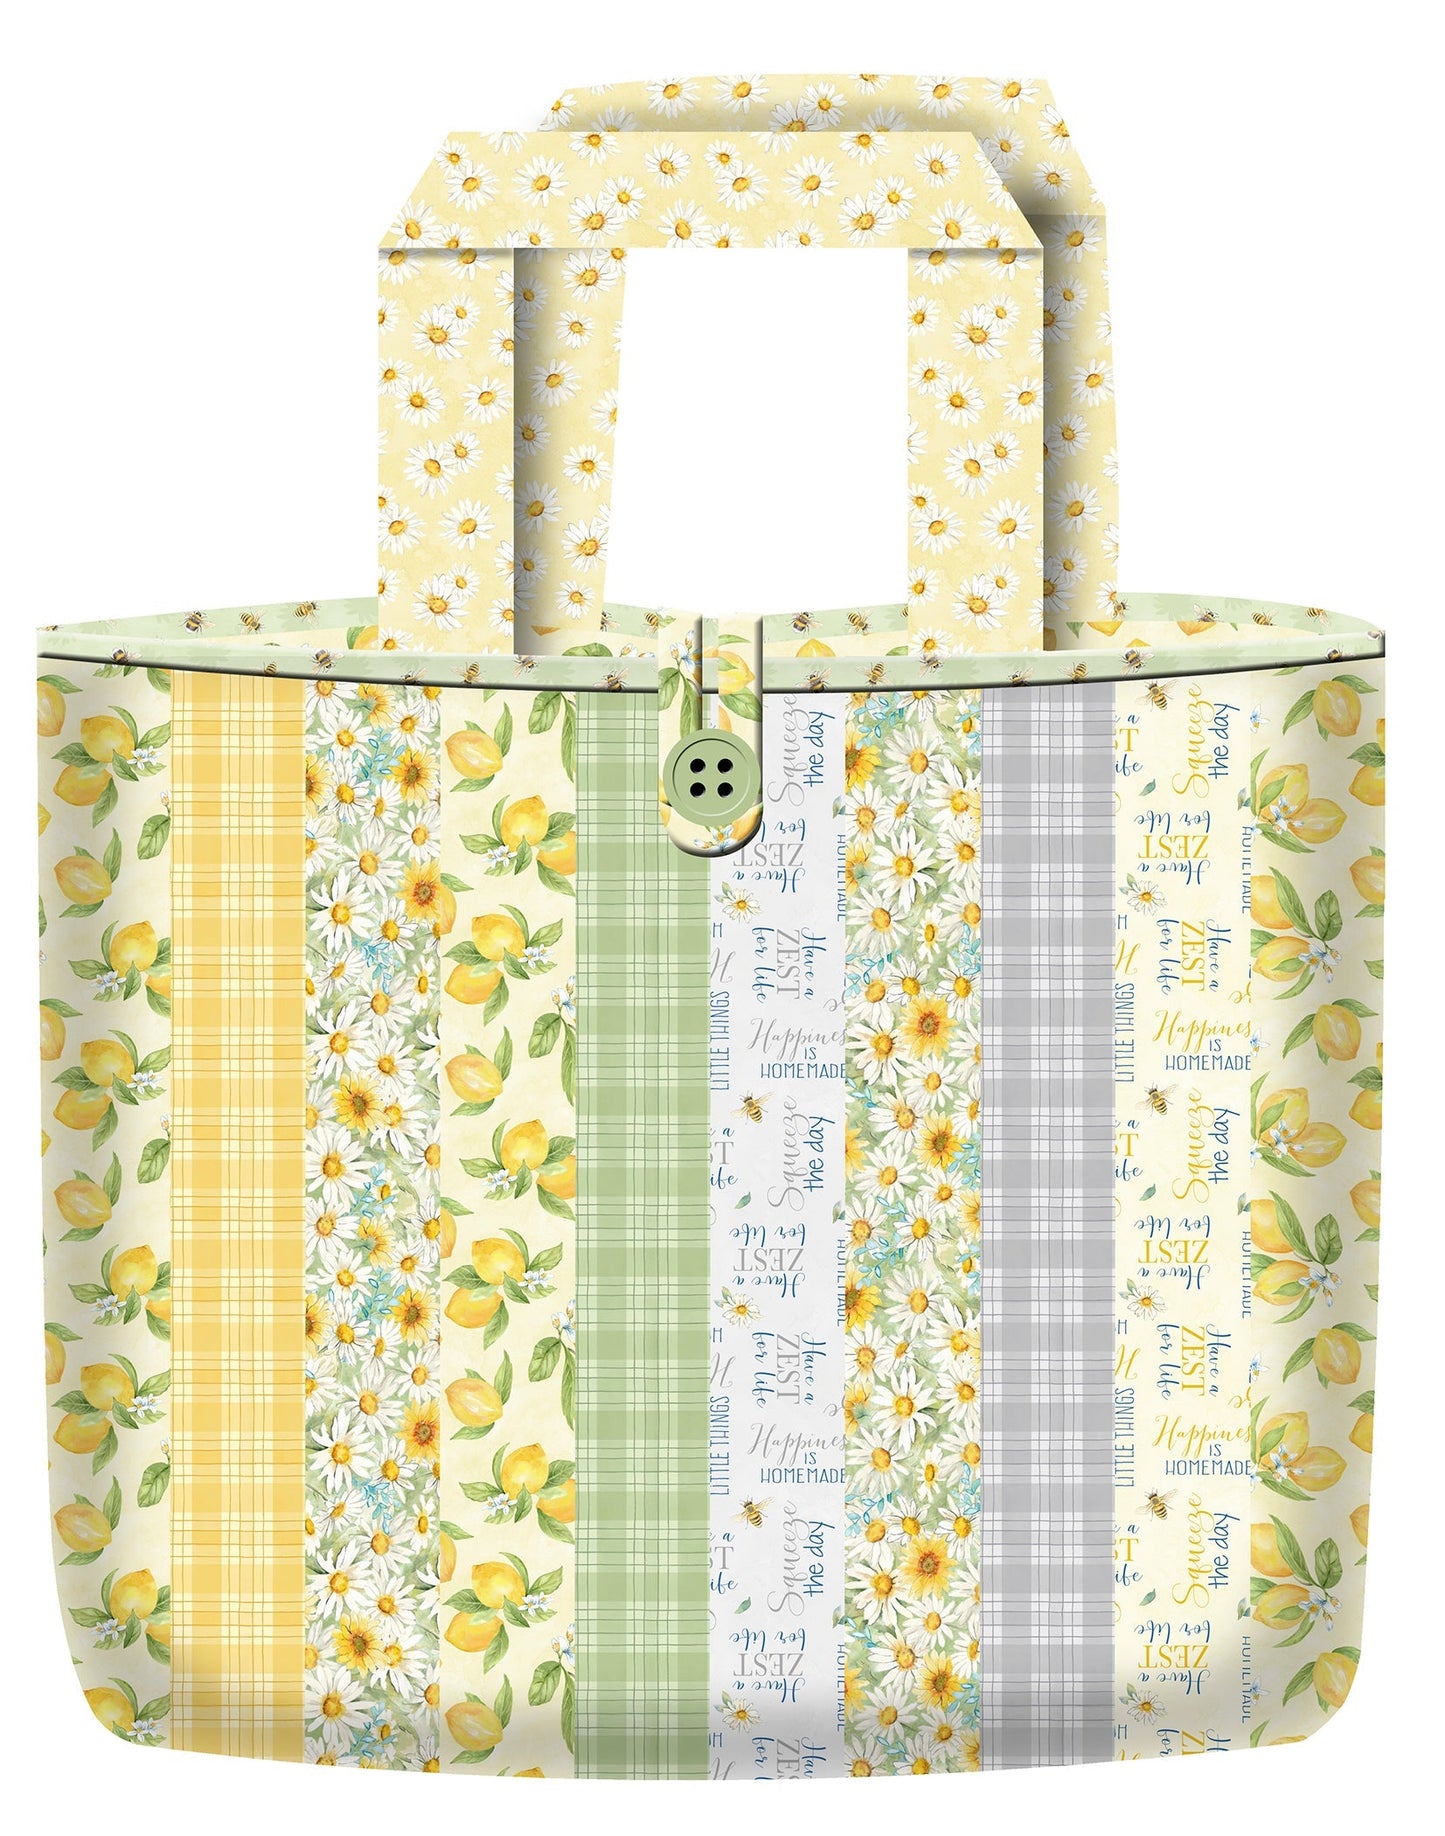 Henry Glass Quilt Pattern TOTE BAG TRIO FREE PATTERN download using jelly roll fabric 2.5" strips